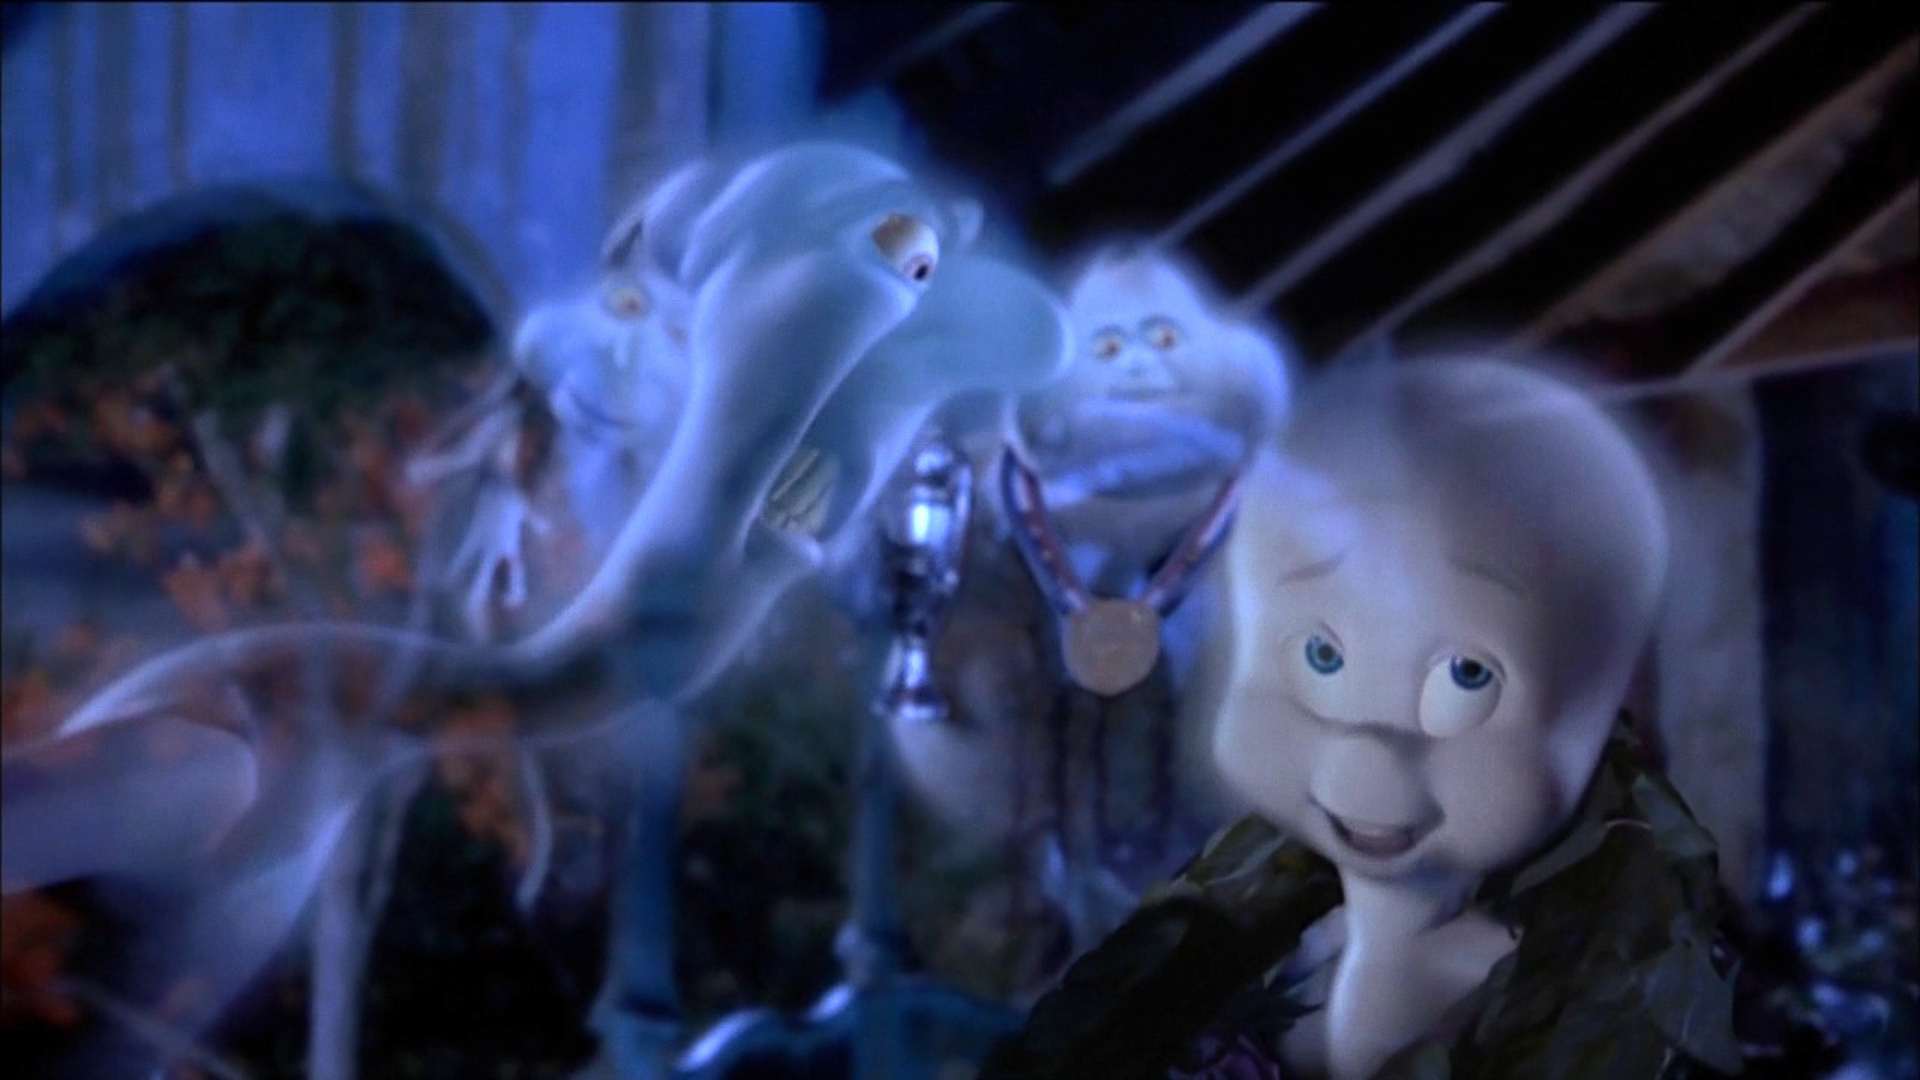 Casper (Movie): A kind young ghost who peacefully haunts a mansion in Maine. 1920x1080 Full HD Wallpaper.